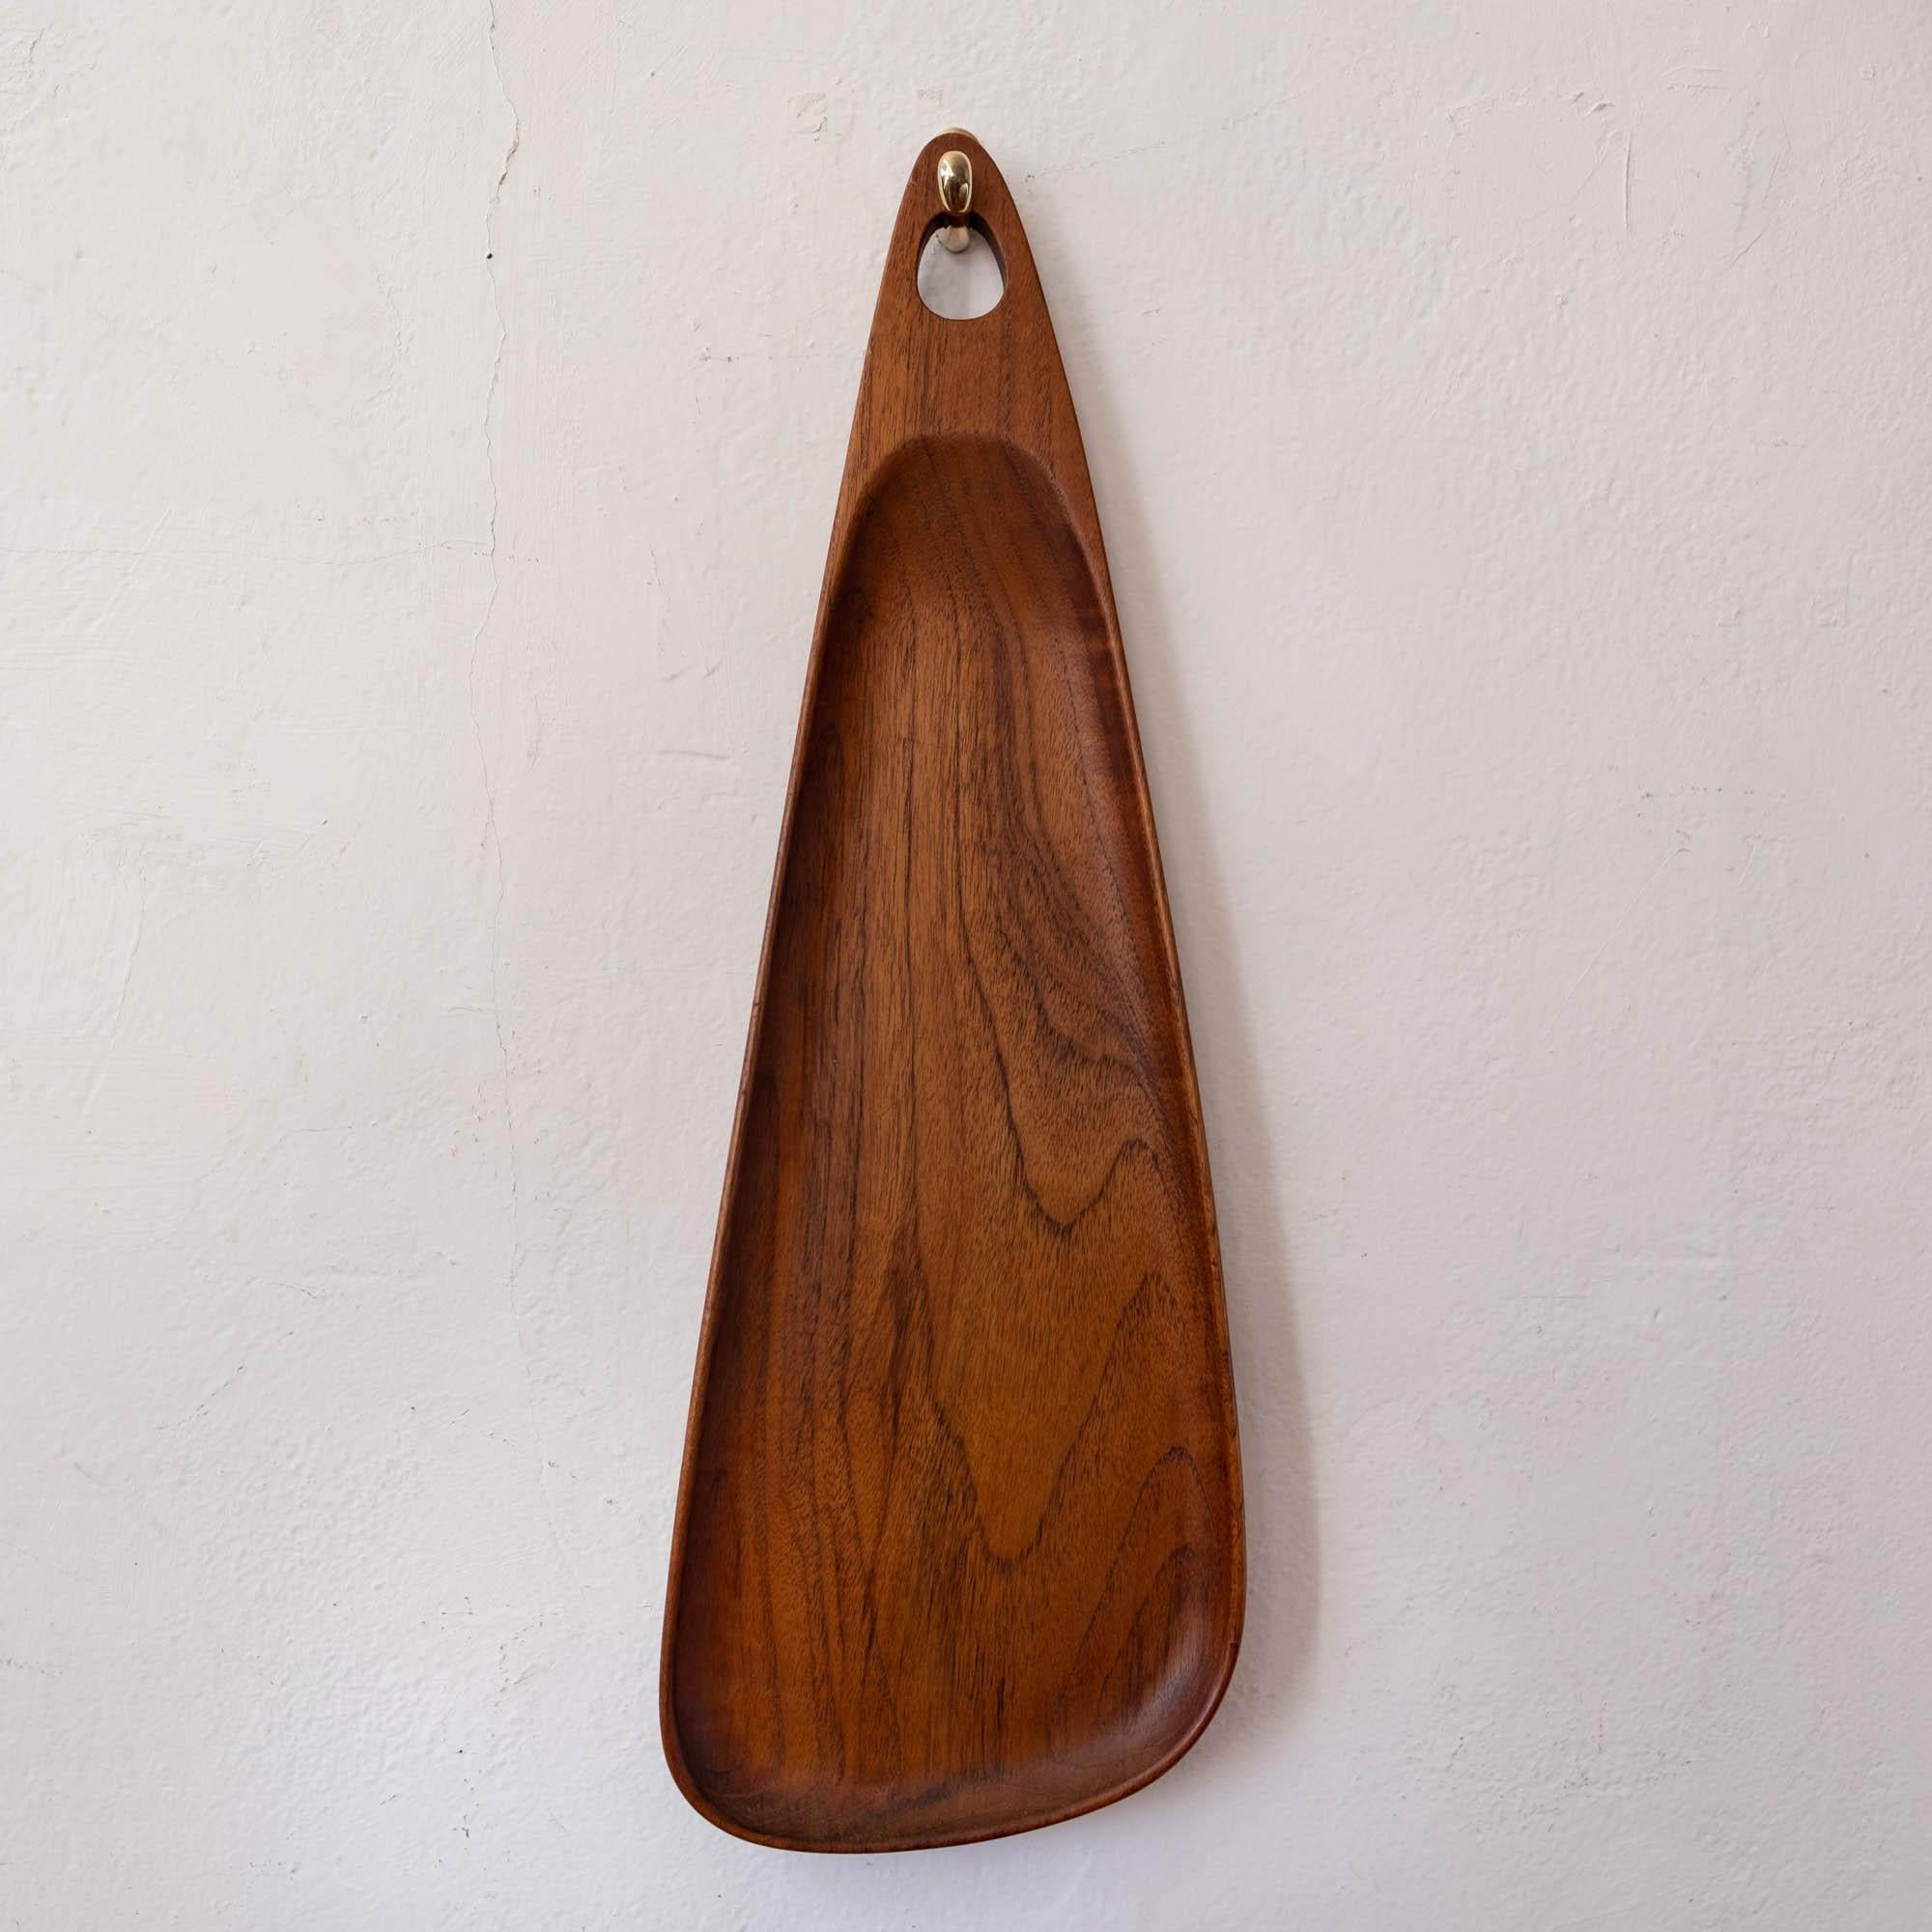 Sculpted teak wall hung tray by Digsmed, from the midcentury. Hangs on a brass hook. Denmark, 1950s.